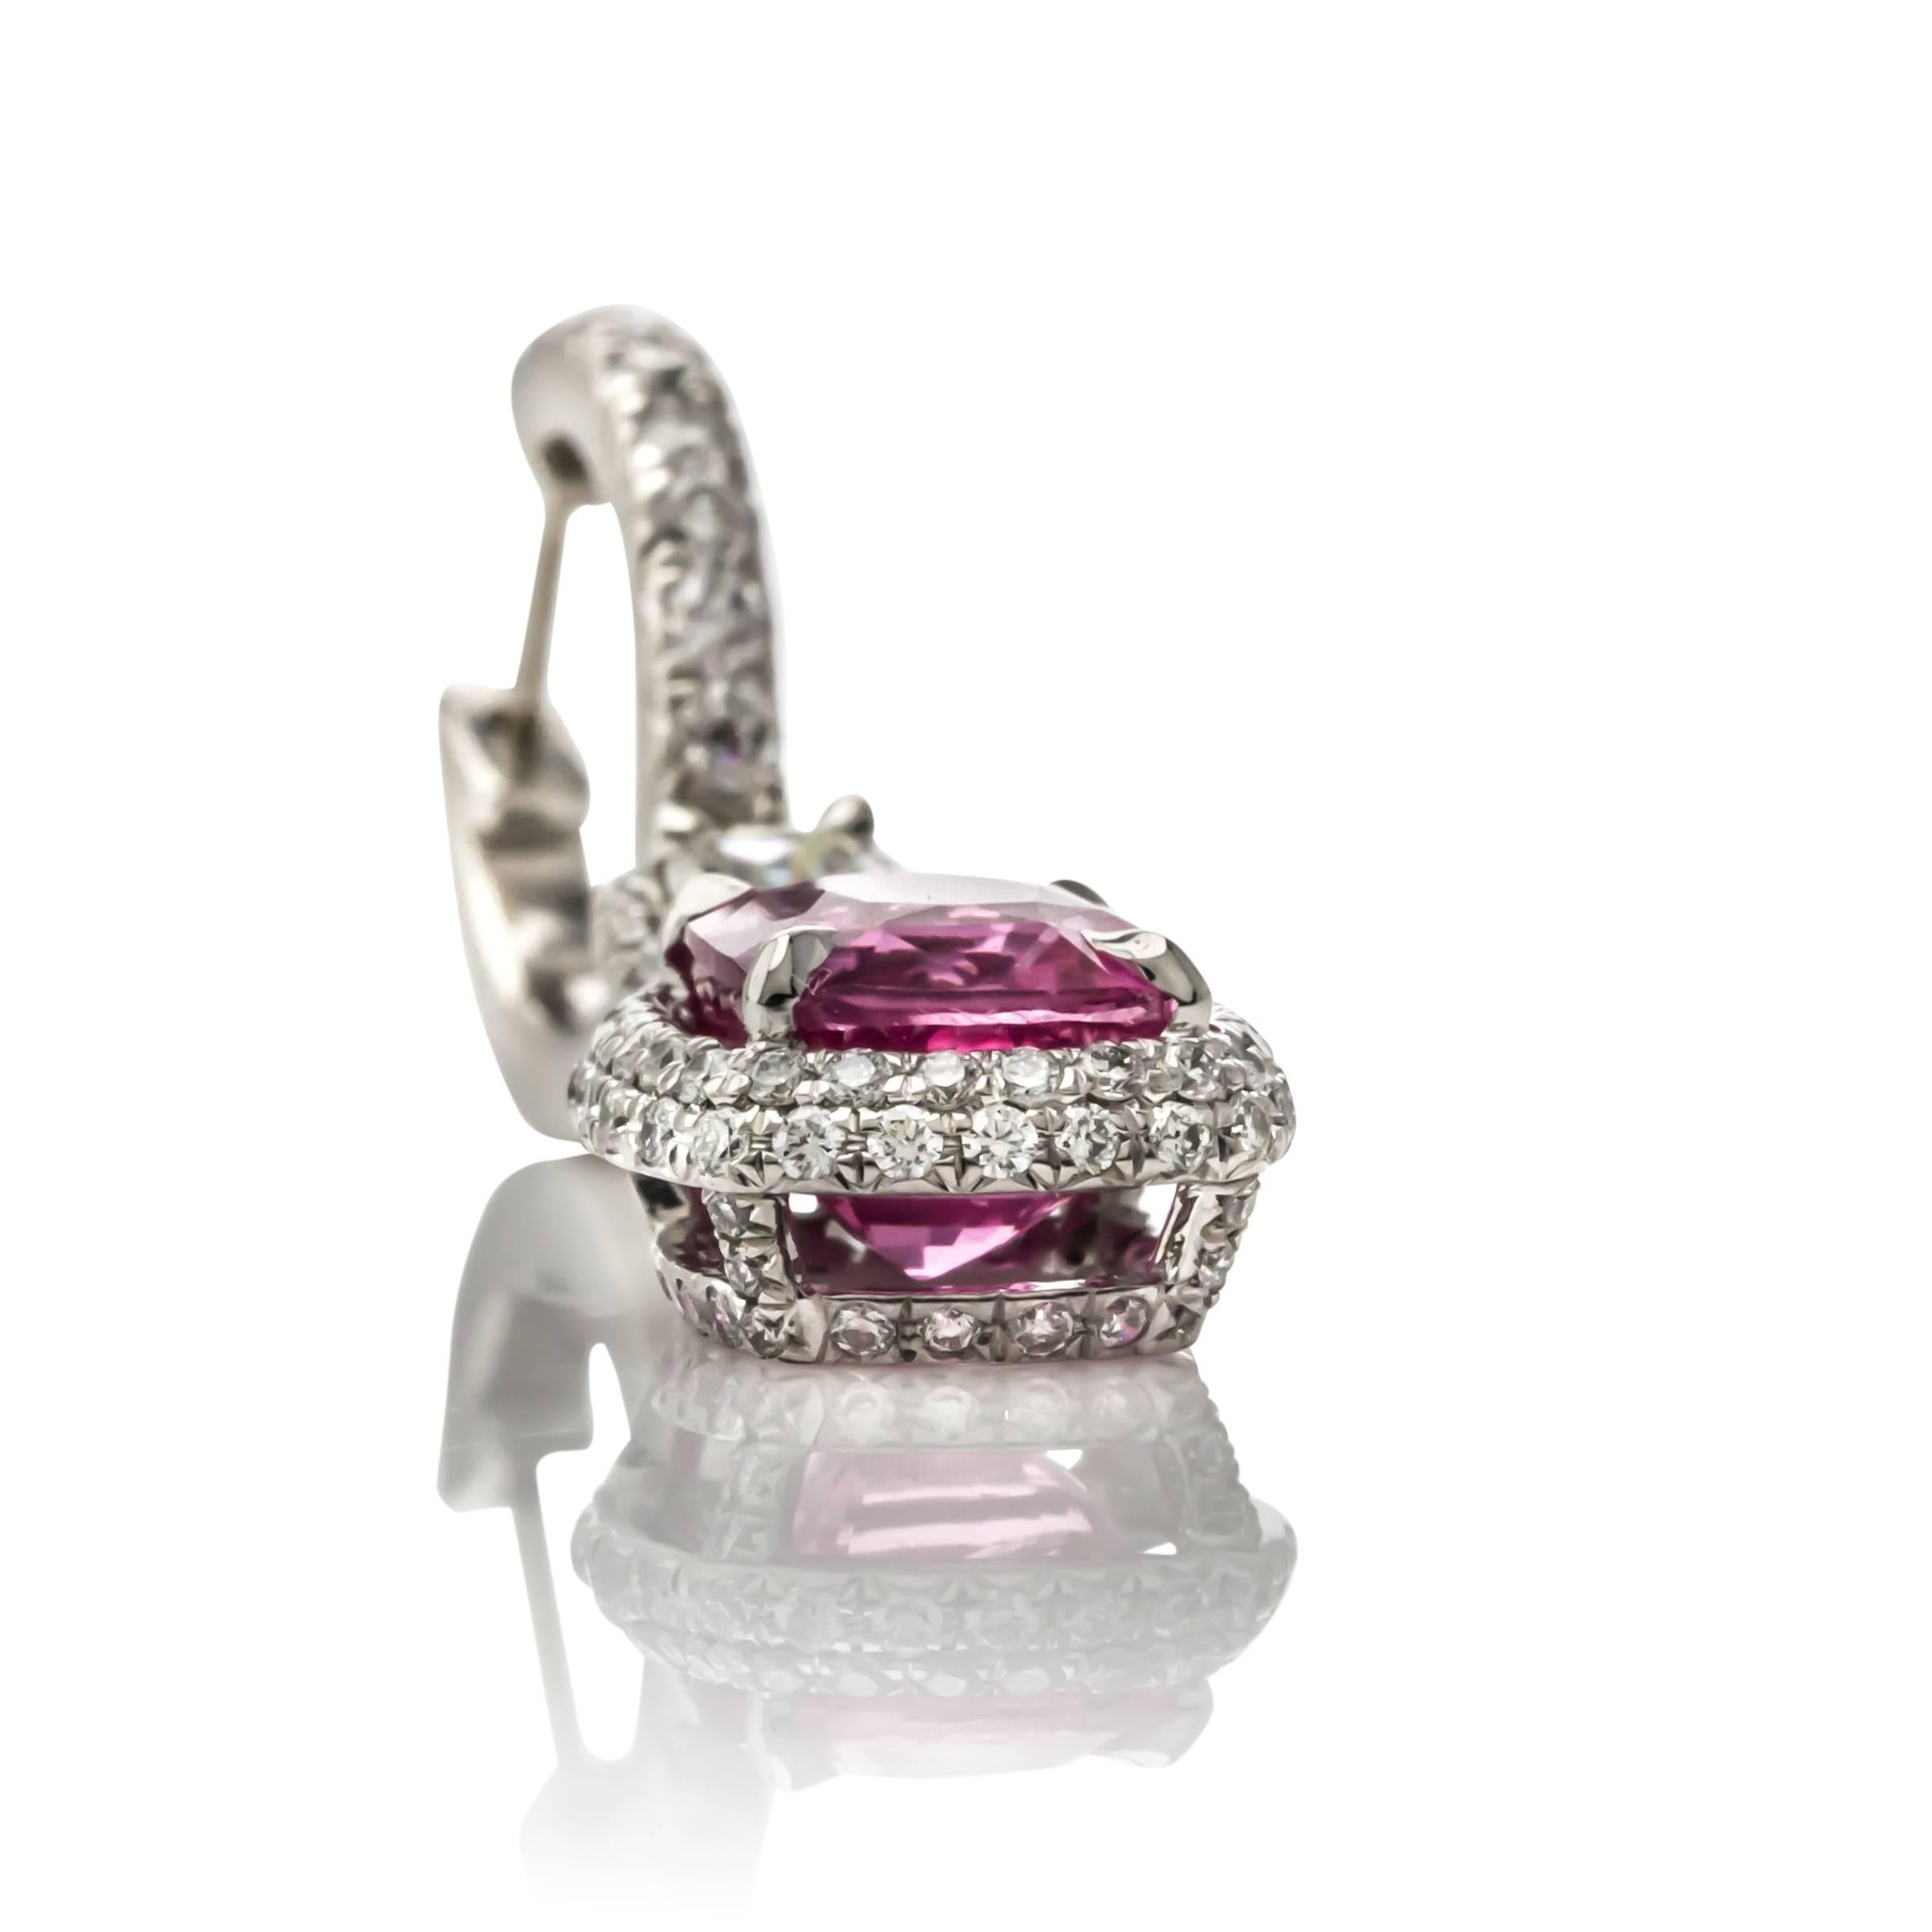 One of a kind 18K white gold pink sapphire and diamond drop earrings. Set with two pink sapphires weighing 5.03 carats total weight of fine color and clarity, surrounded by two hundred and four round brilliant cut diamonds weighing 1.02 carats total